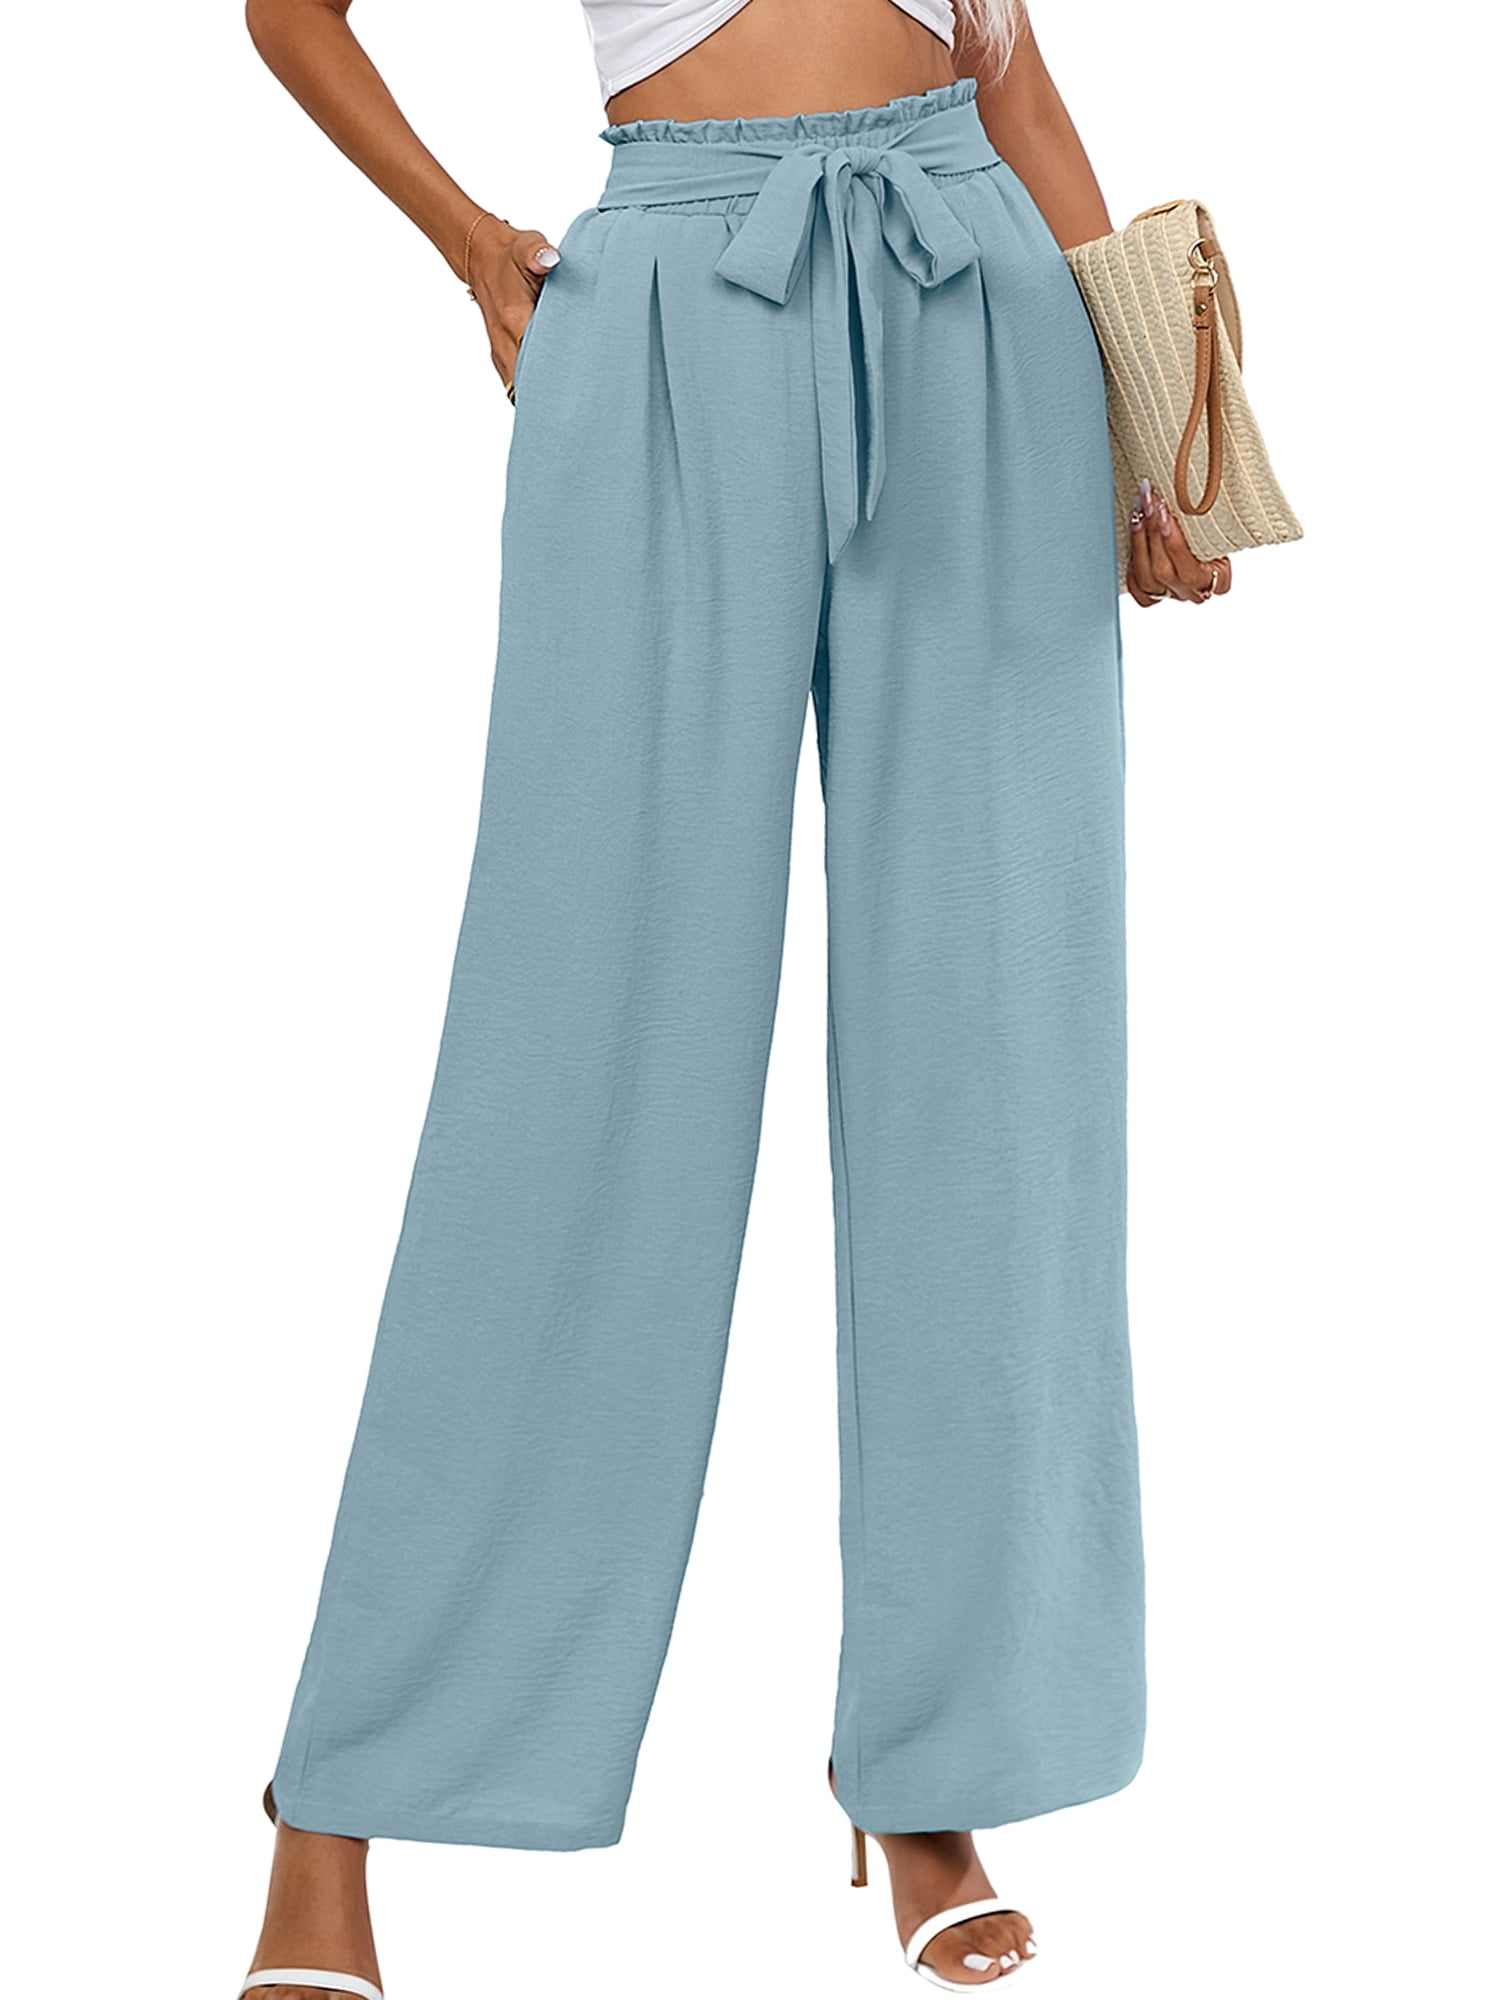 Cbcbtwo Linen Pants for Women,Summer Plus Size Elastic High Waisted Pants  Casual Straight Wide Leg Trousers with Pockets X-Large Mi05-blue